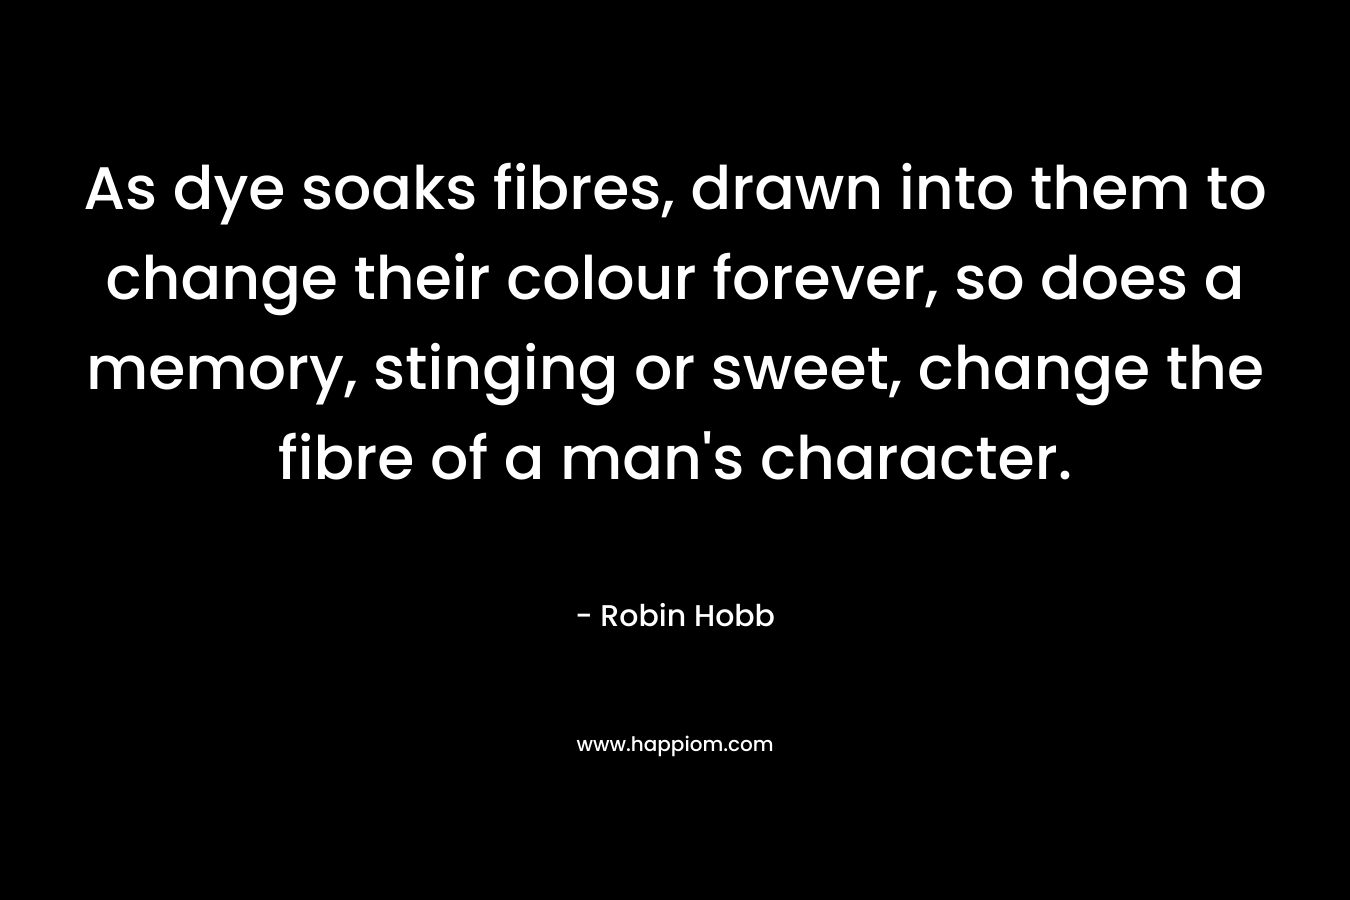 As dye soaks fibres, drawn into them to change their colour forever, so does a memory, stinging or sweet, change the fibre of a man’s character. – Robin Hobb